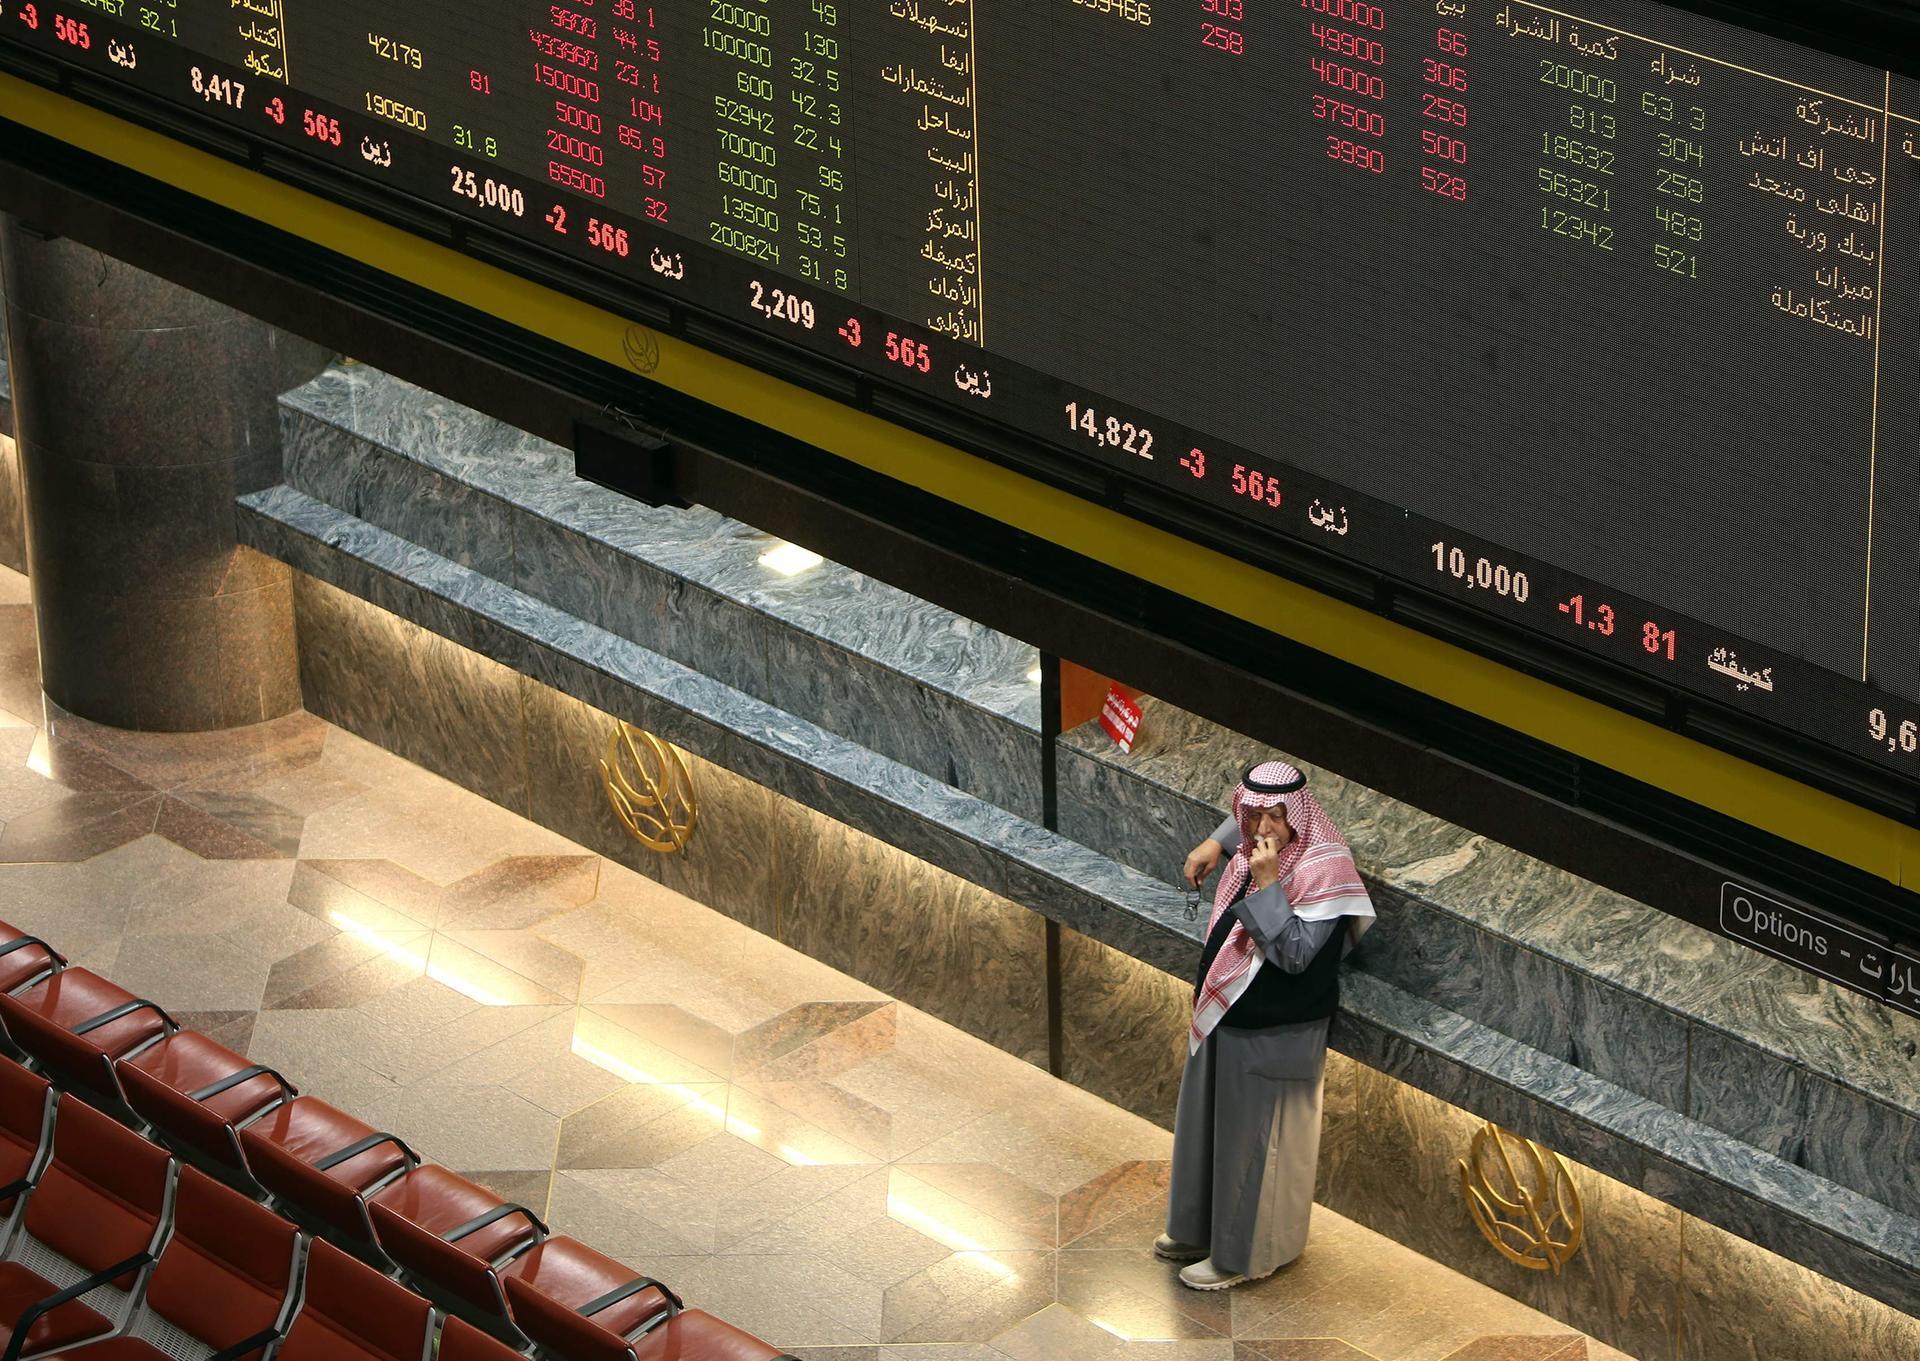 A Kuwaiti trader follows stock prices at Boursa Kuwait stock market, in Kuwait City on January 6, 2020. Gulf stock markets were hit by a panicky sell-off amid Iranian vows of retaliation over the US killing of top military commander Qasem Soleimani, with all seven markets in the Gulf Cooperation Council (GCC) states closing in the red on the first trading day since the US attack. / AFP / YASSER AL-ZAYYAT
